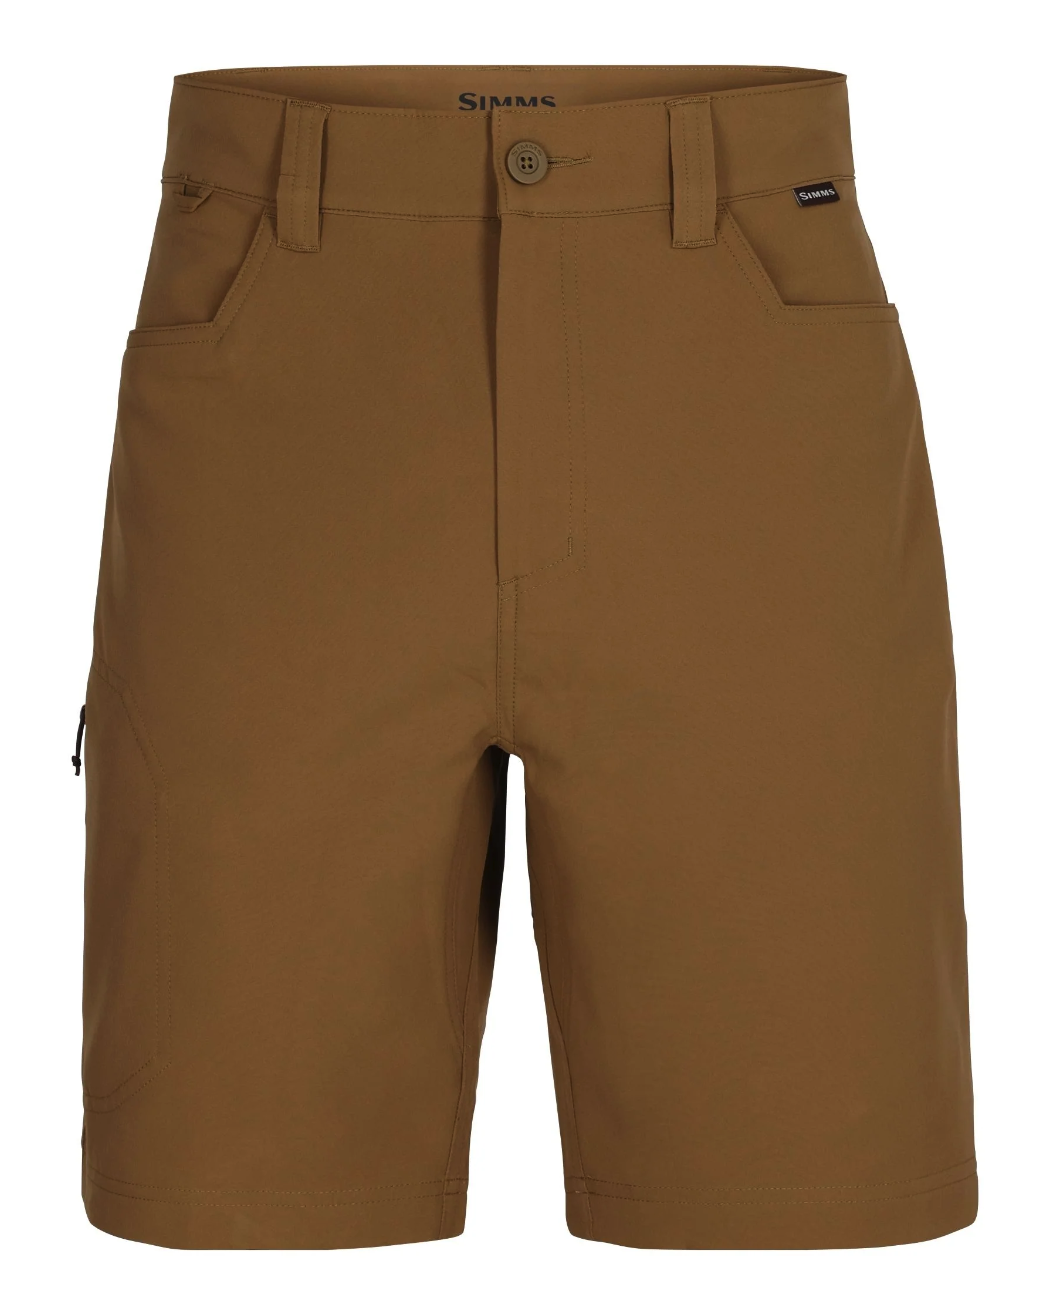 Shop Simms Skiff Shorts online at the best price.